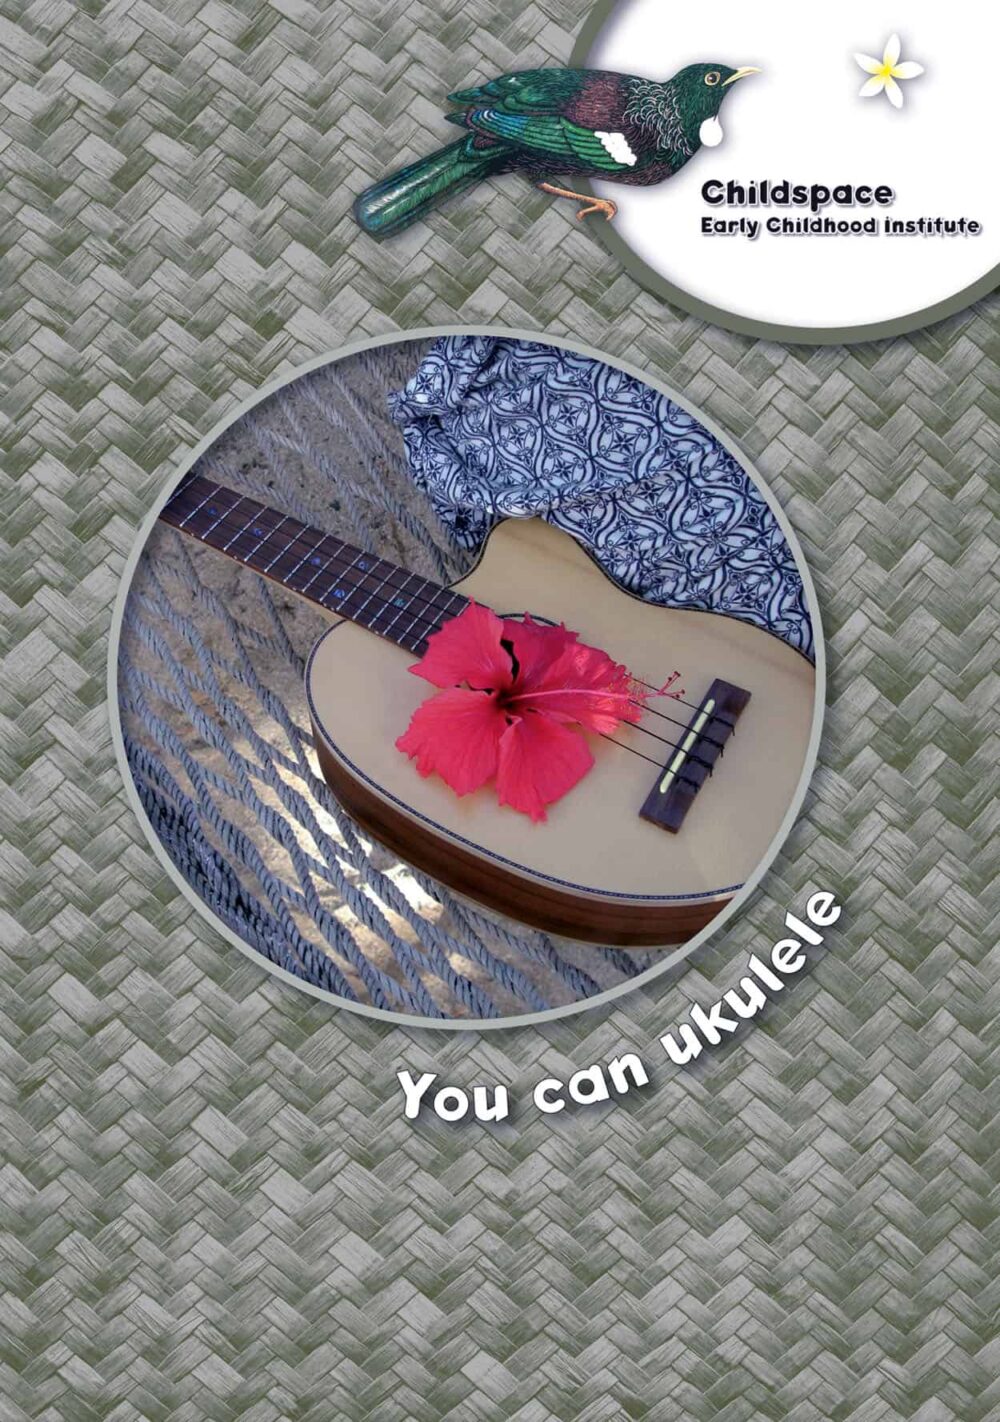 You can ukulele book and CD